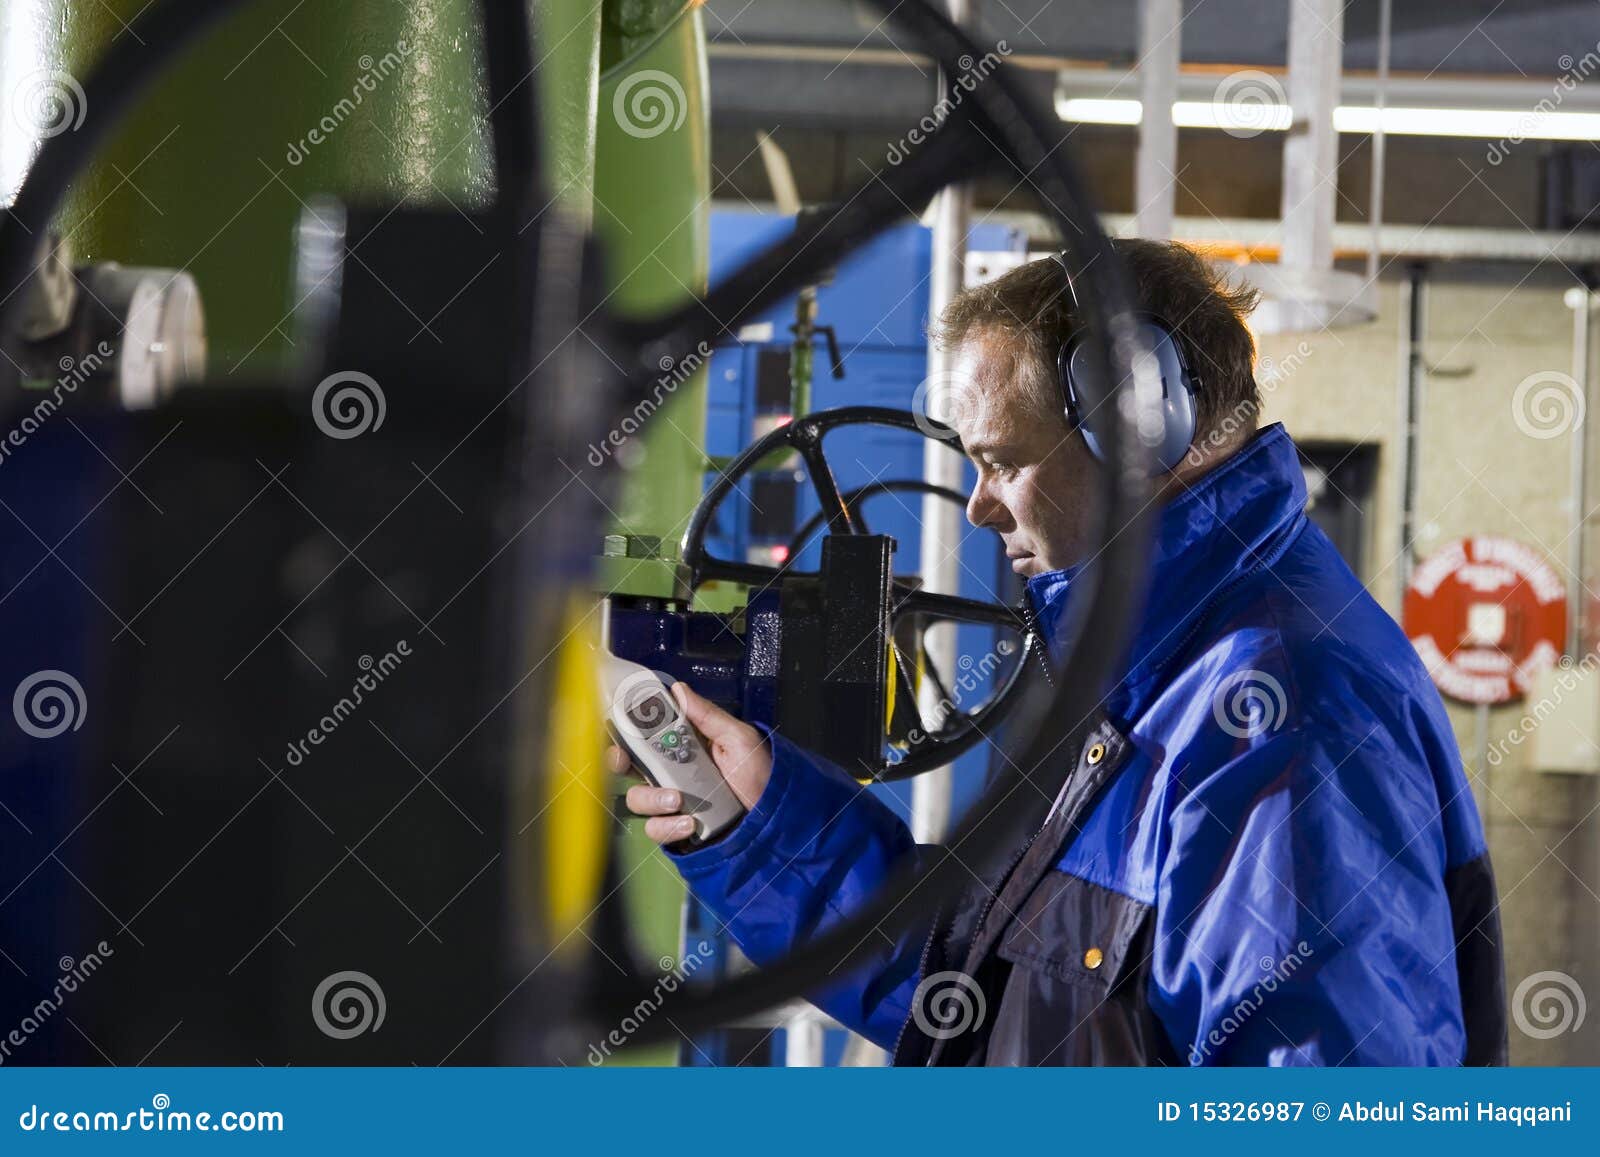 engineer measuring noise levels